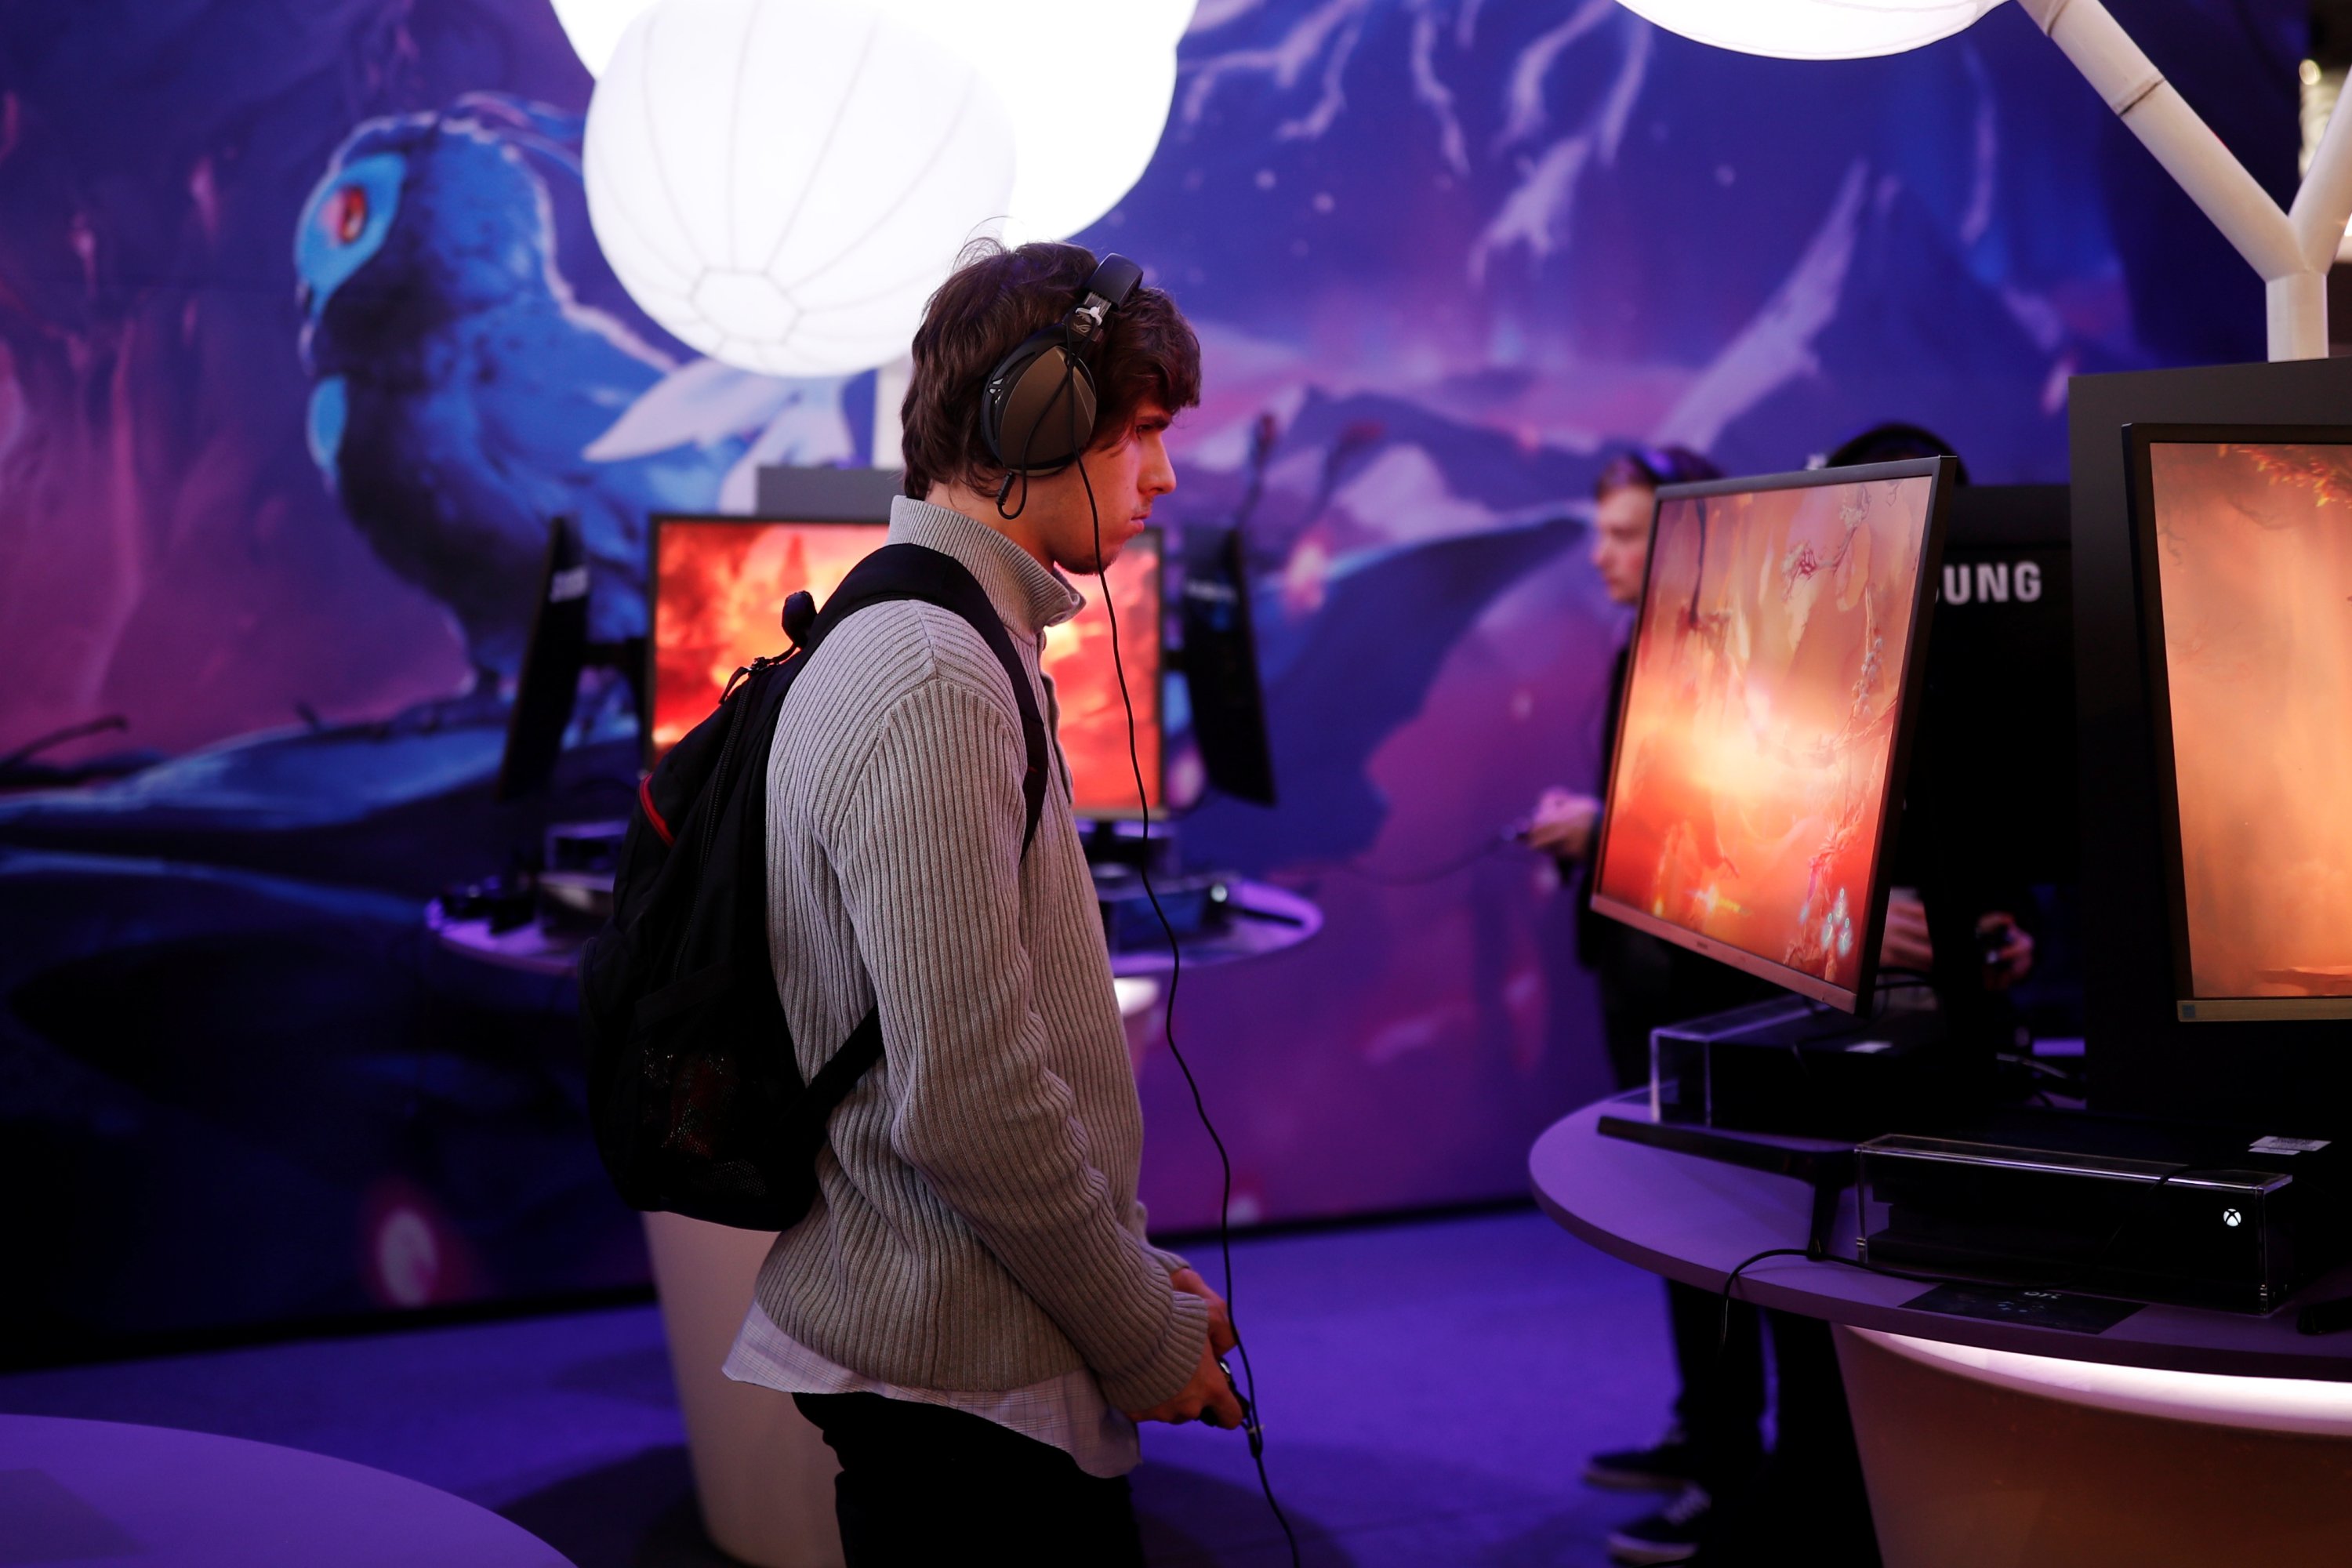 A gamer plays the game 'Ori and the Will of the Wisps' at the Paris Games Week (PGW), a trade fair for video games in Paris, France, October 25, 2018. (REUTERS Photo)